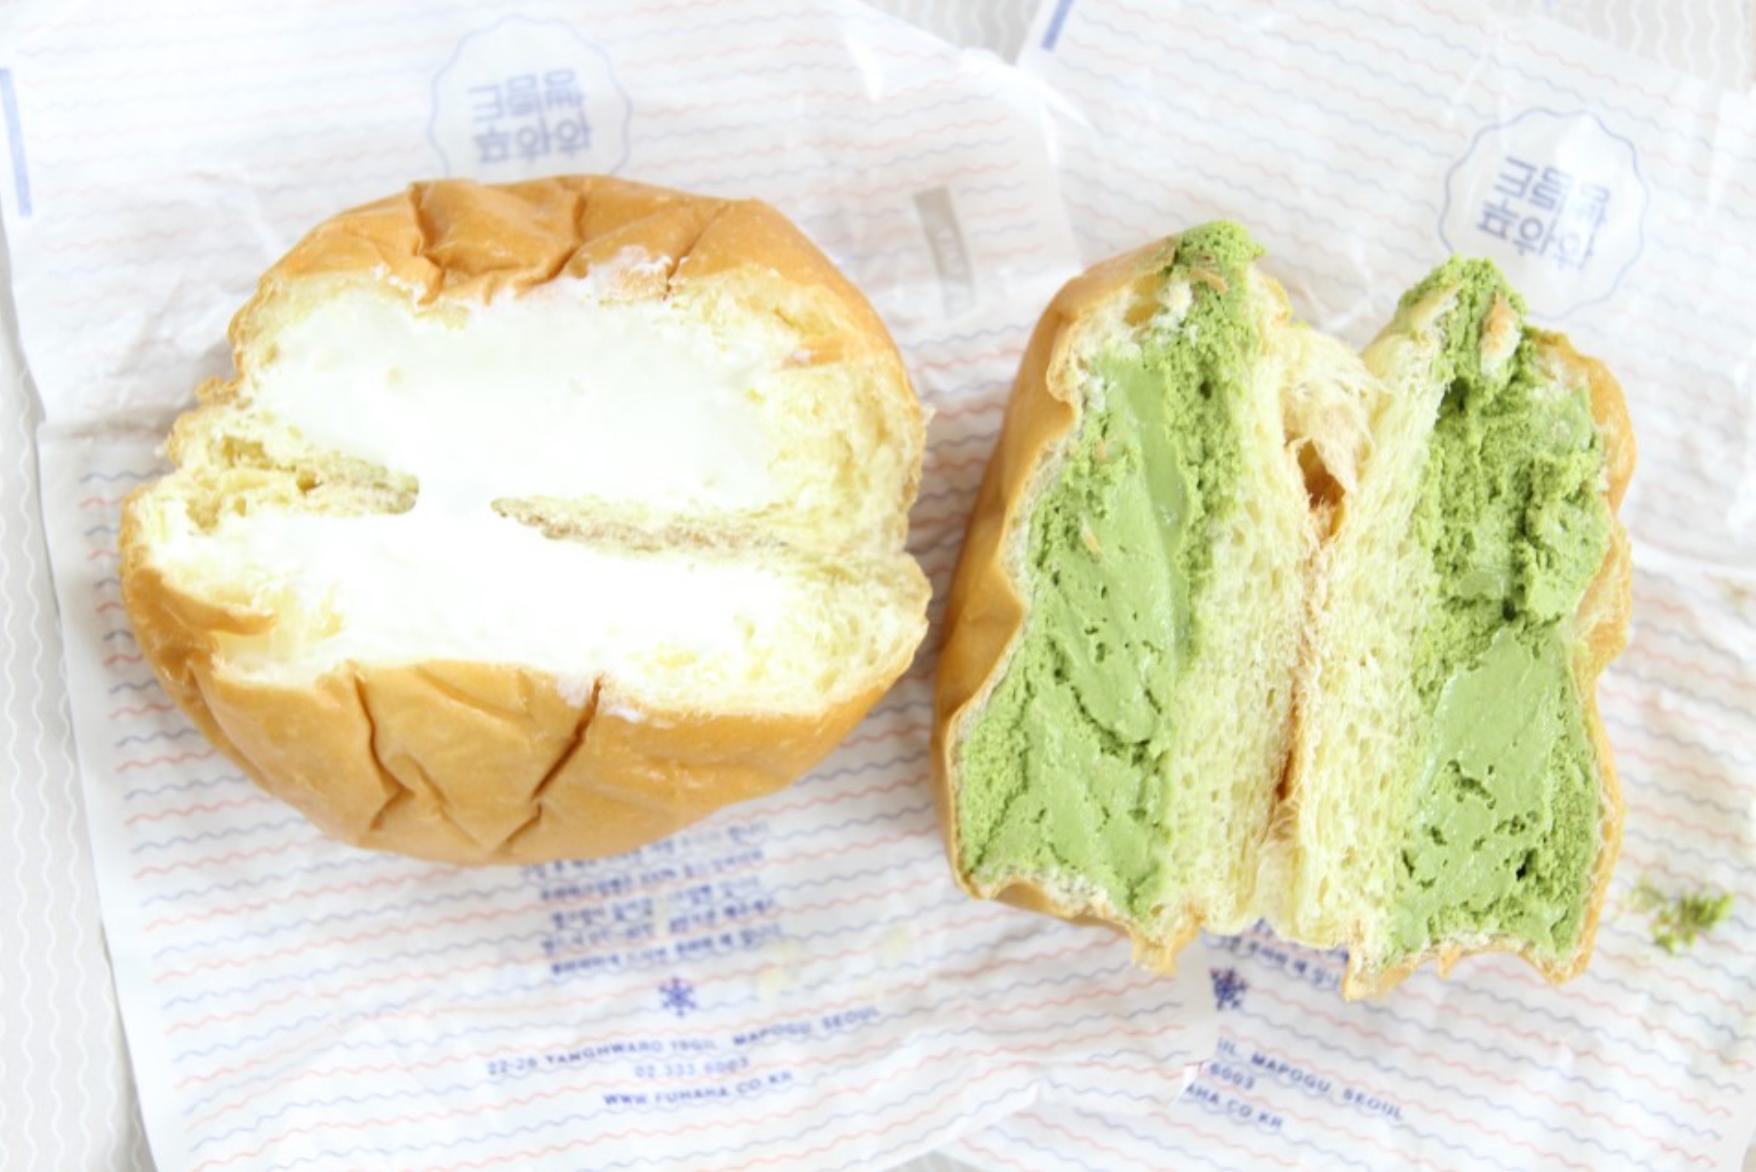 A mouth-watering image of 푸하하크림빵 (cream bread) from a Korean bakery, featuring a soft bun filled with delicious ingredients.